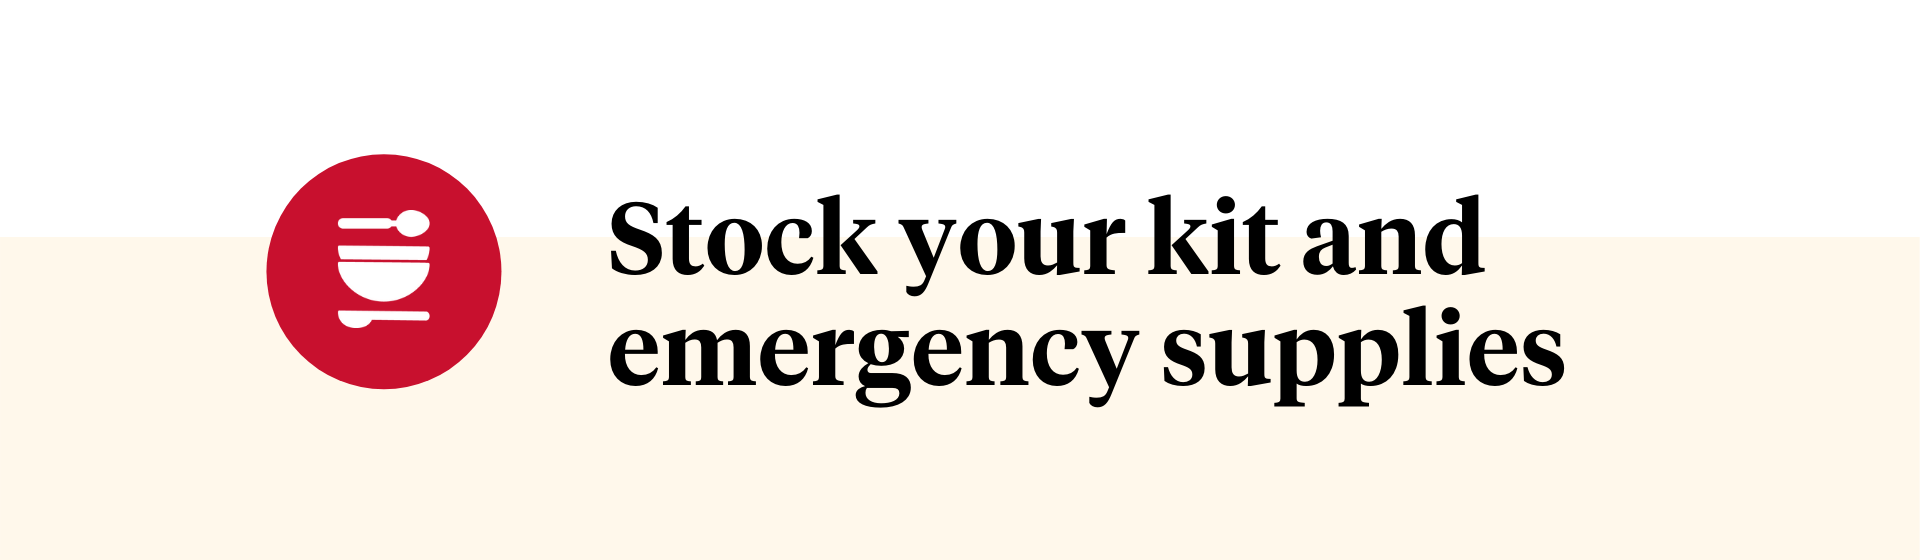 Stock your kit and emergency supplies graphic.